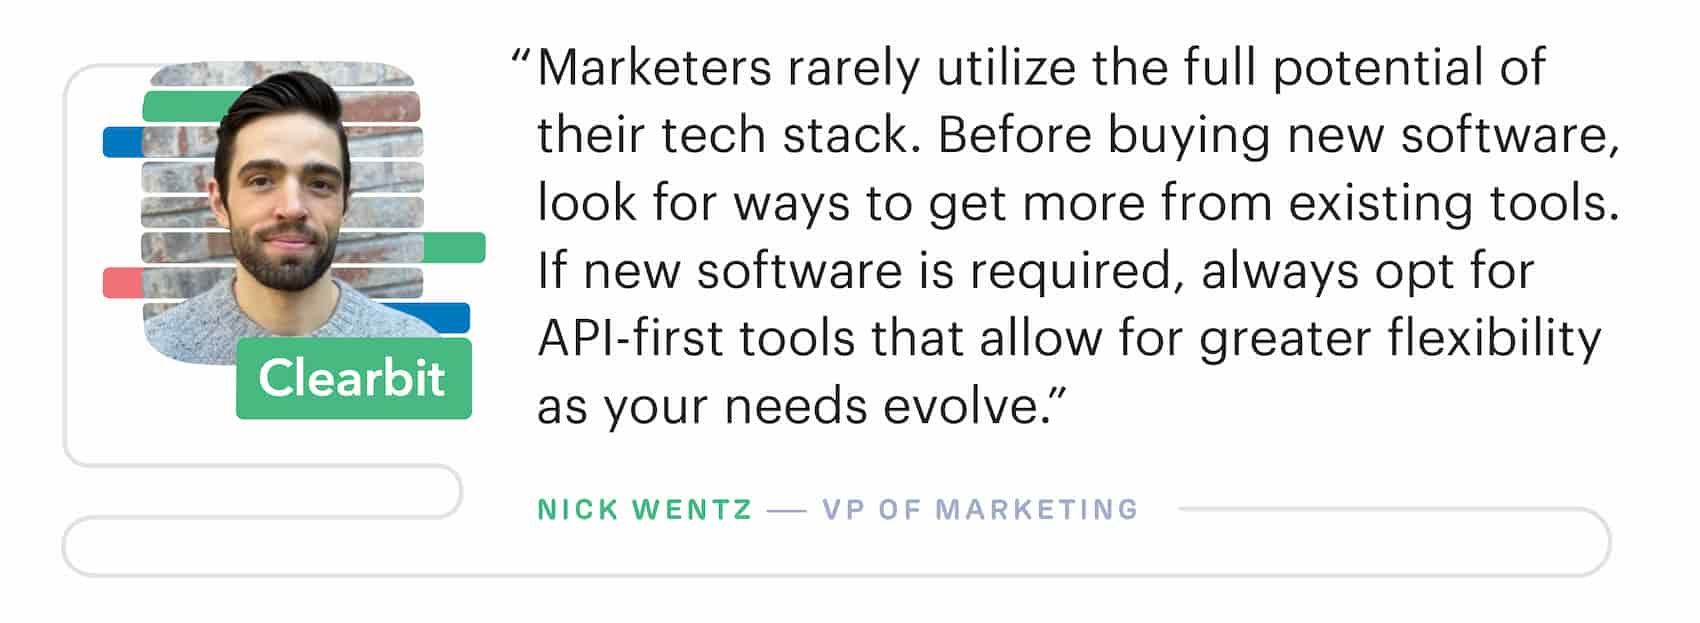 "Marketers rarely utilize the full potential of their martech stack. Before buying new software, look for ways to get more from existing tools." – Nick Wentz, VP of Marketing at Clearbit